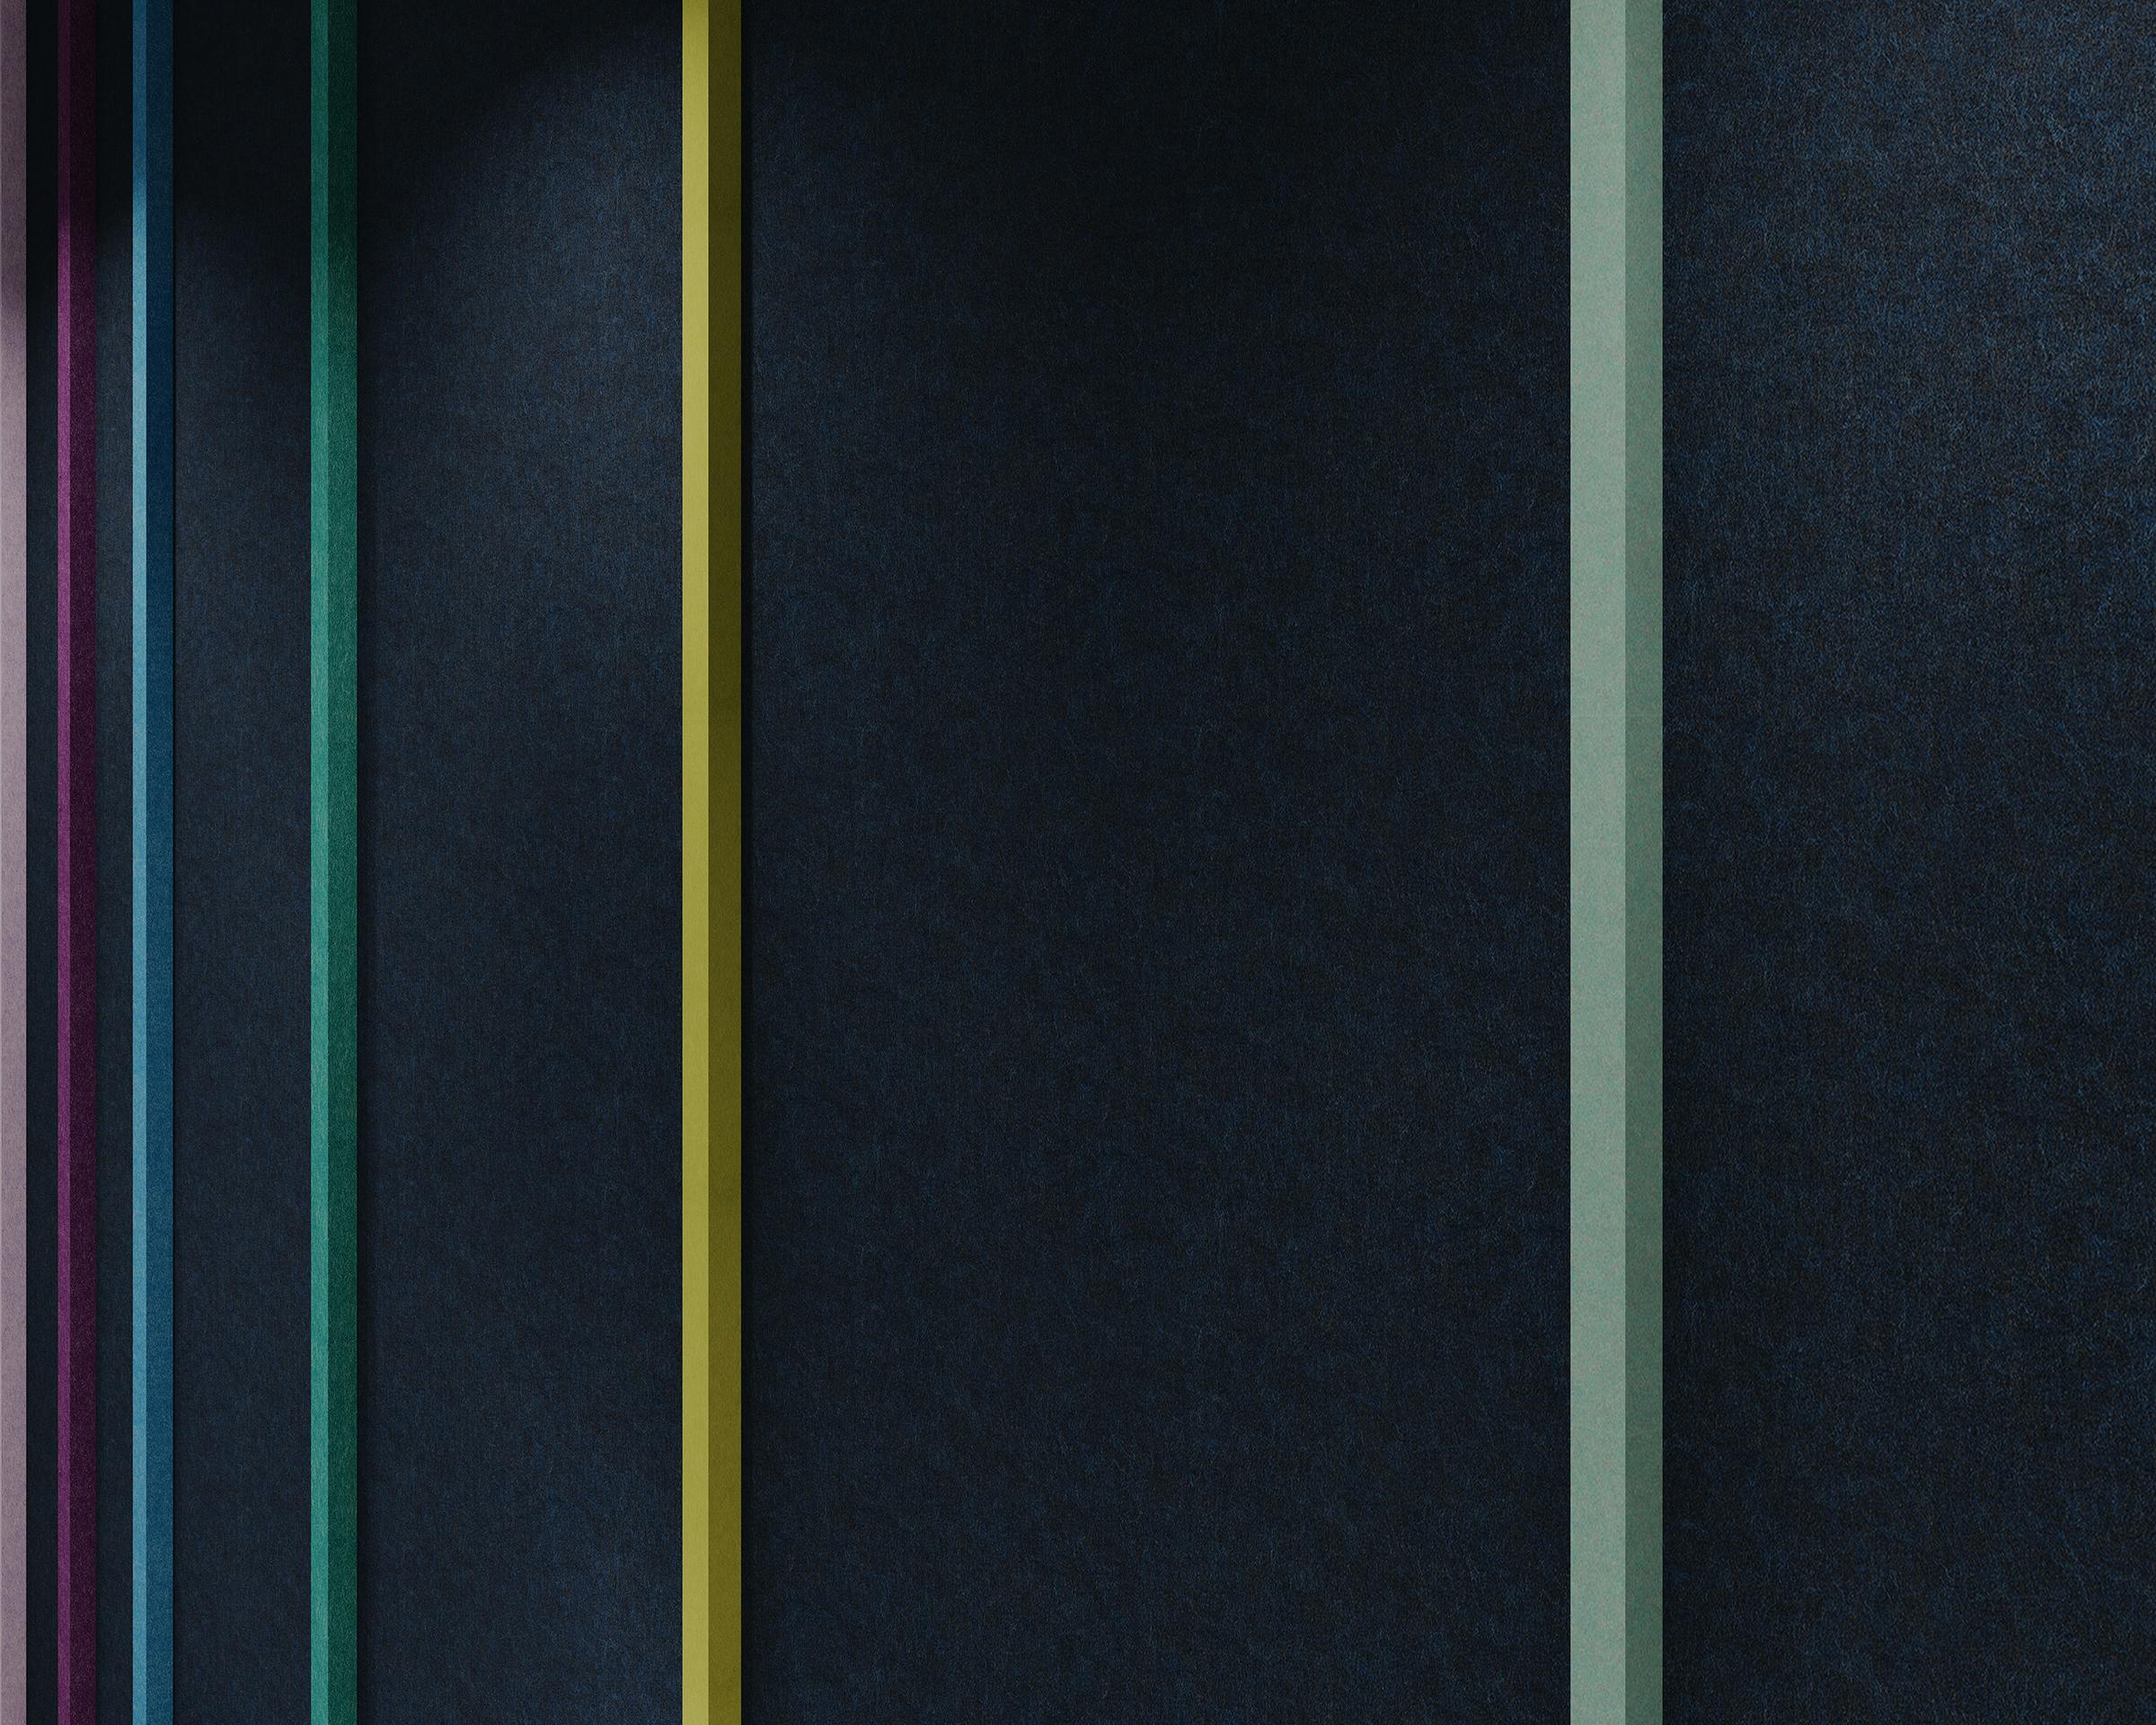 A dark acoustic felt wall with vertical stripes of different colors—purple, blue, green, yellow, and light green—spaced evenly apart. The seam between each stripe creates a visually striking pattern against the dark background.